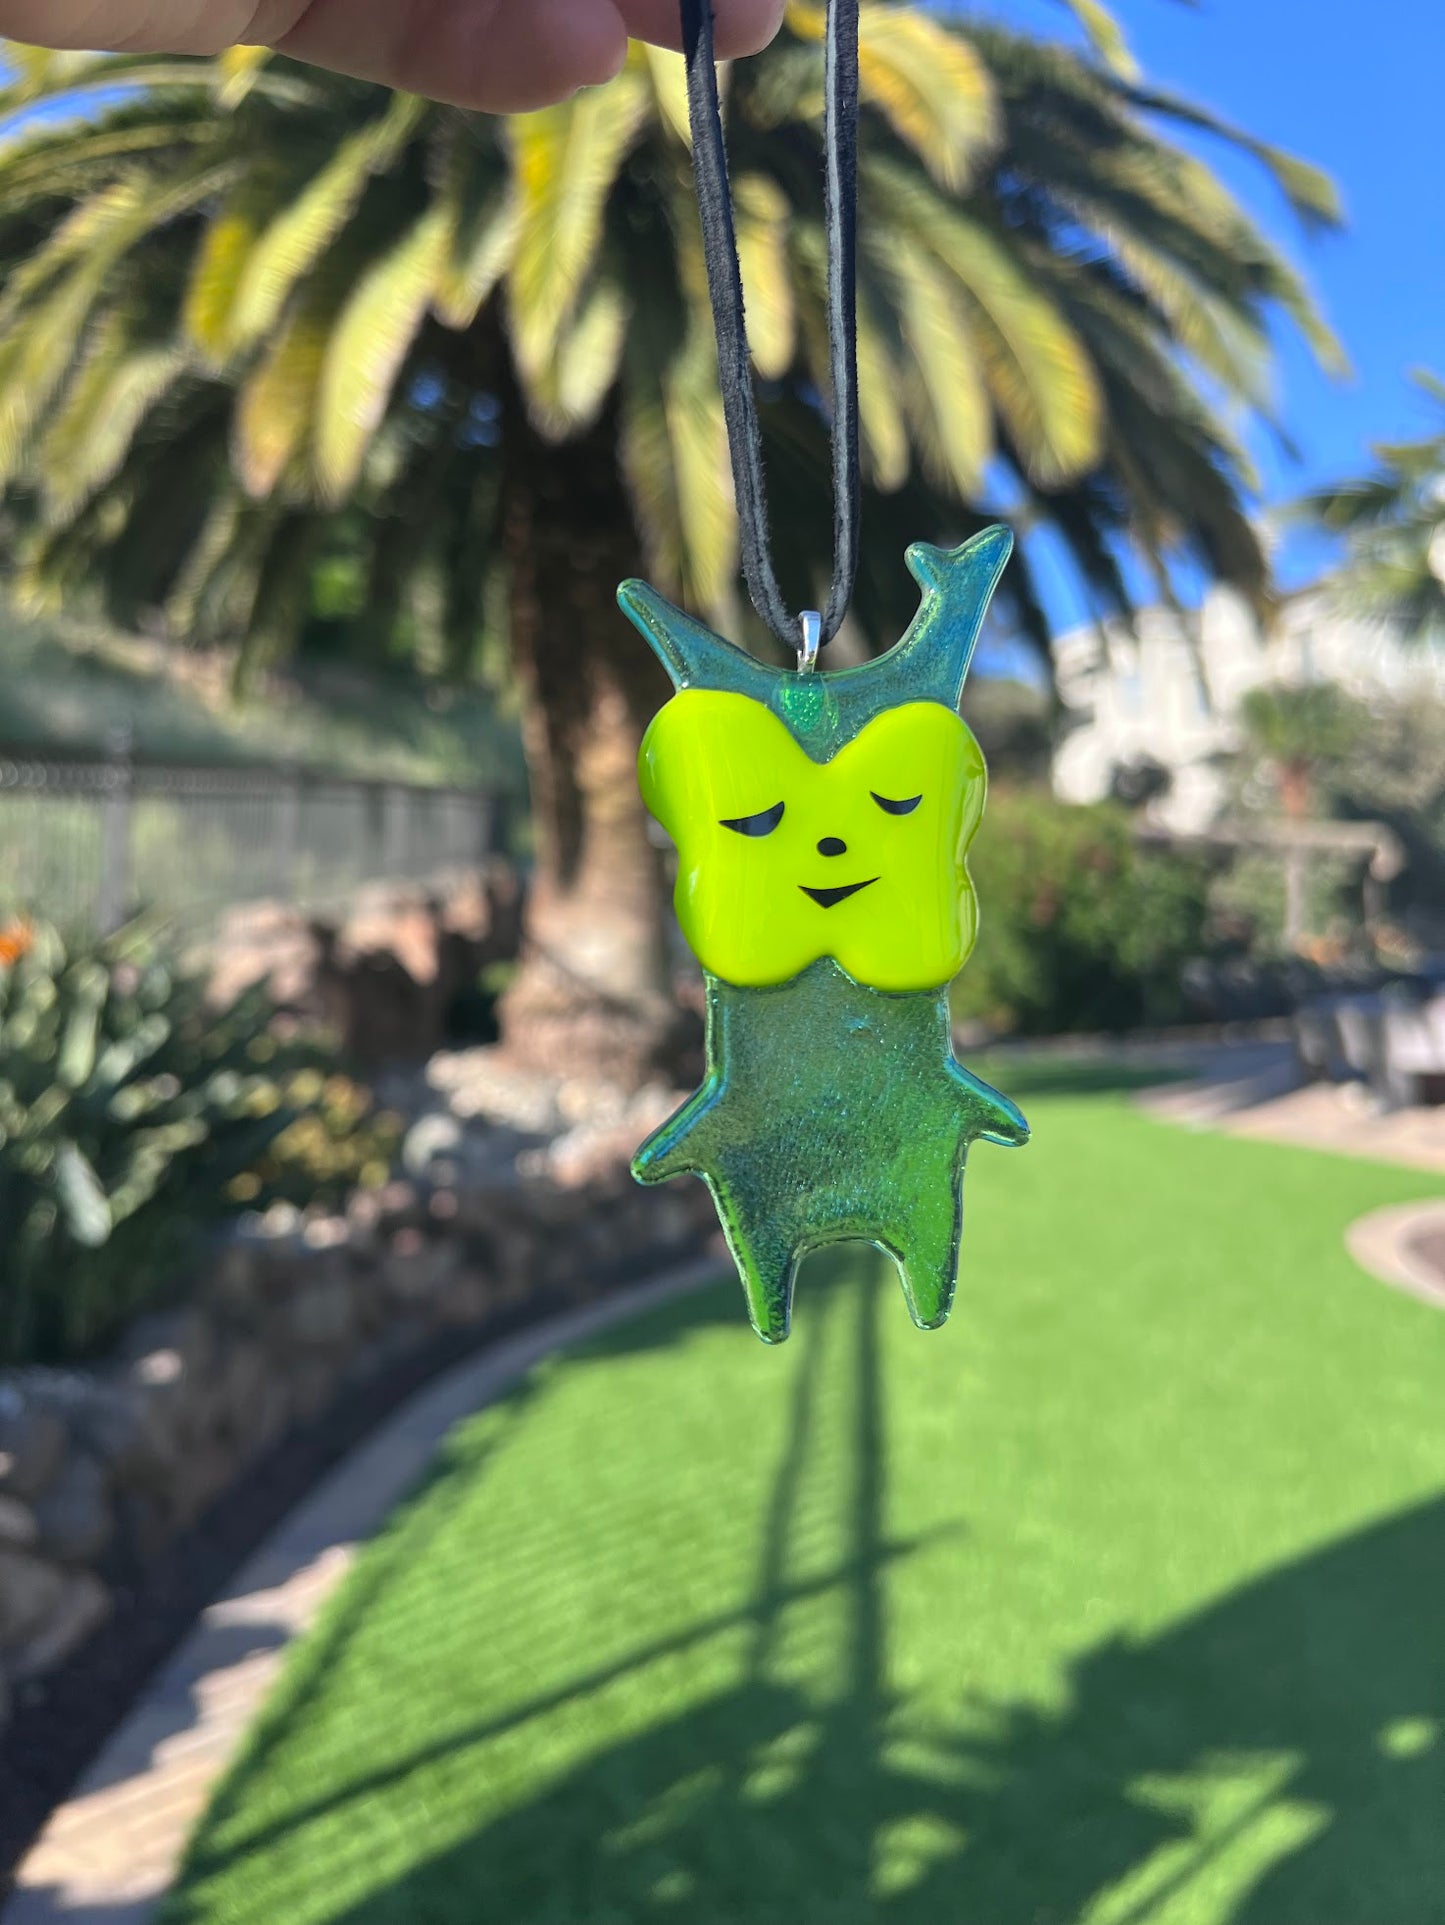 Stained Glass Korok Suncatcher! Inspired by The Legend of Zelda / Breath of The Wild Video Game!